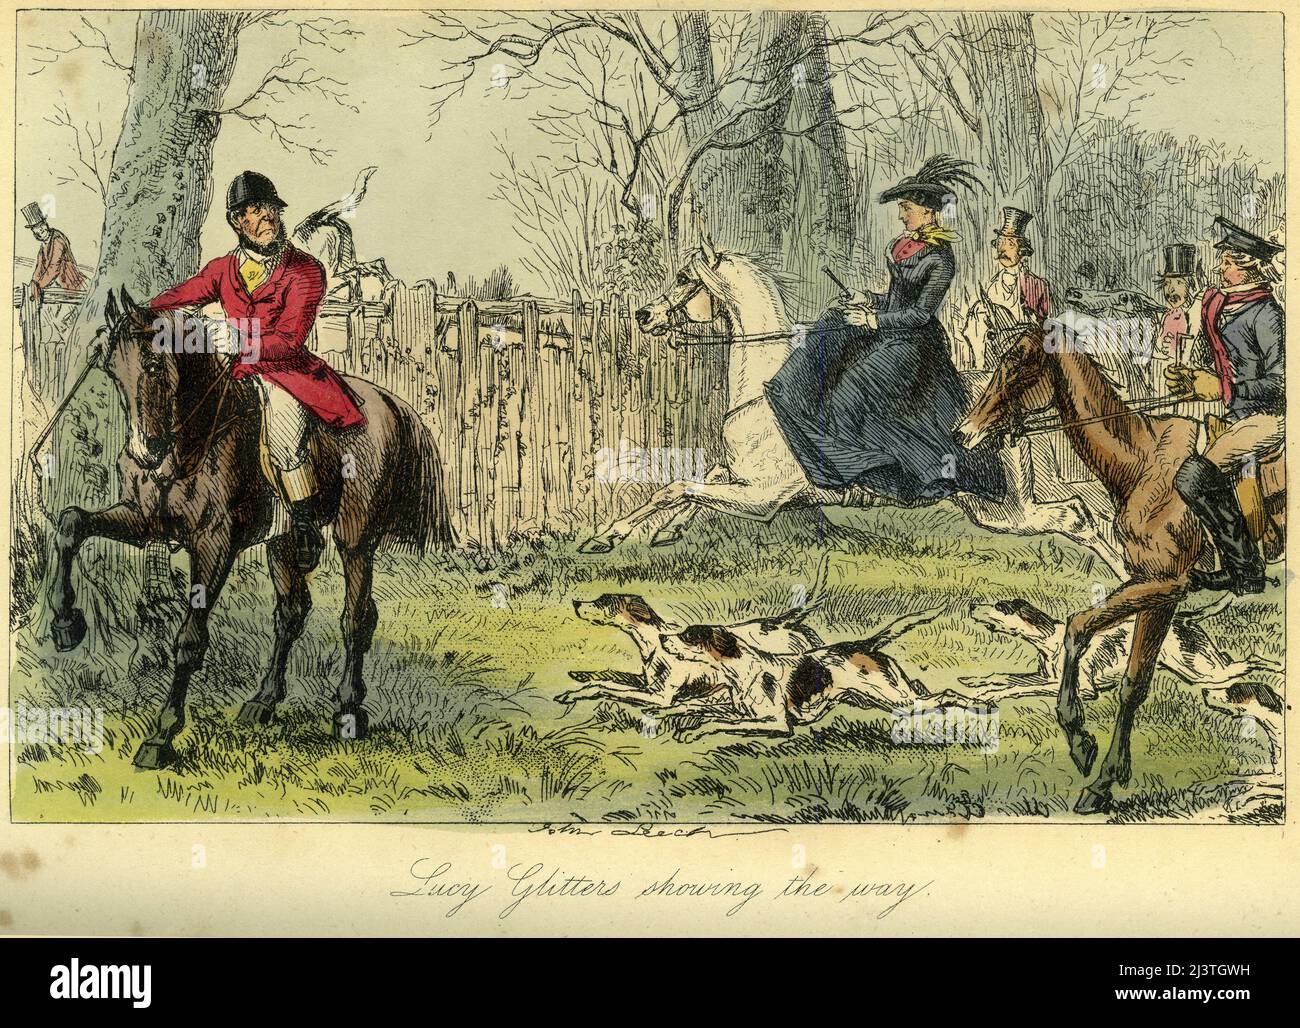 Lucy Glitters showing the way. Handcoloured steel engraving by John Leech from Robert Smith Surtees’ Mr. Sponge’s Sporting Tour,, circa 1850. A well dressed woman riding sidesaddle gallops through a gate during a traditional English fox hunt. Stock Photo